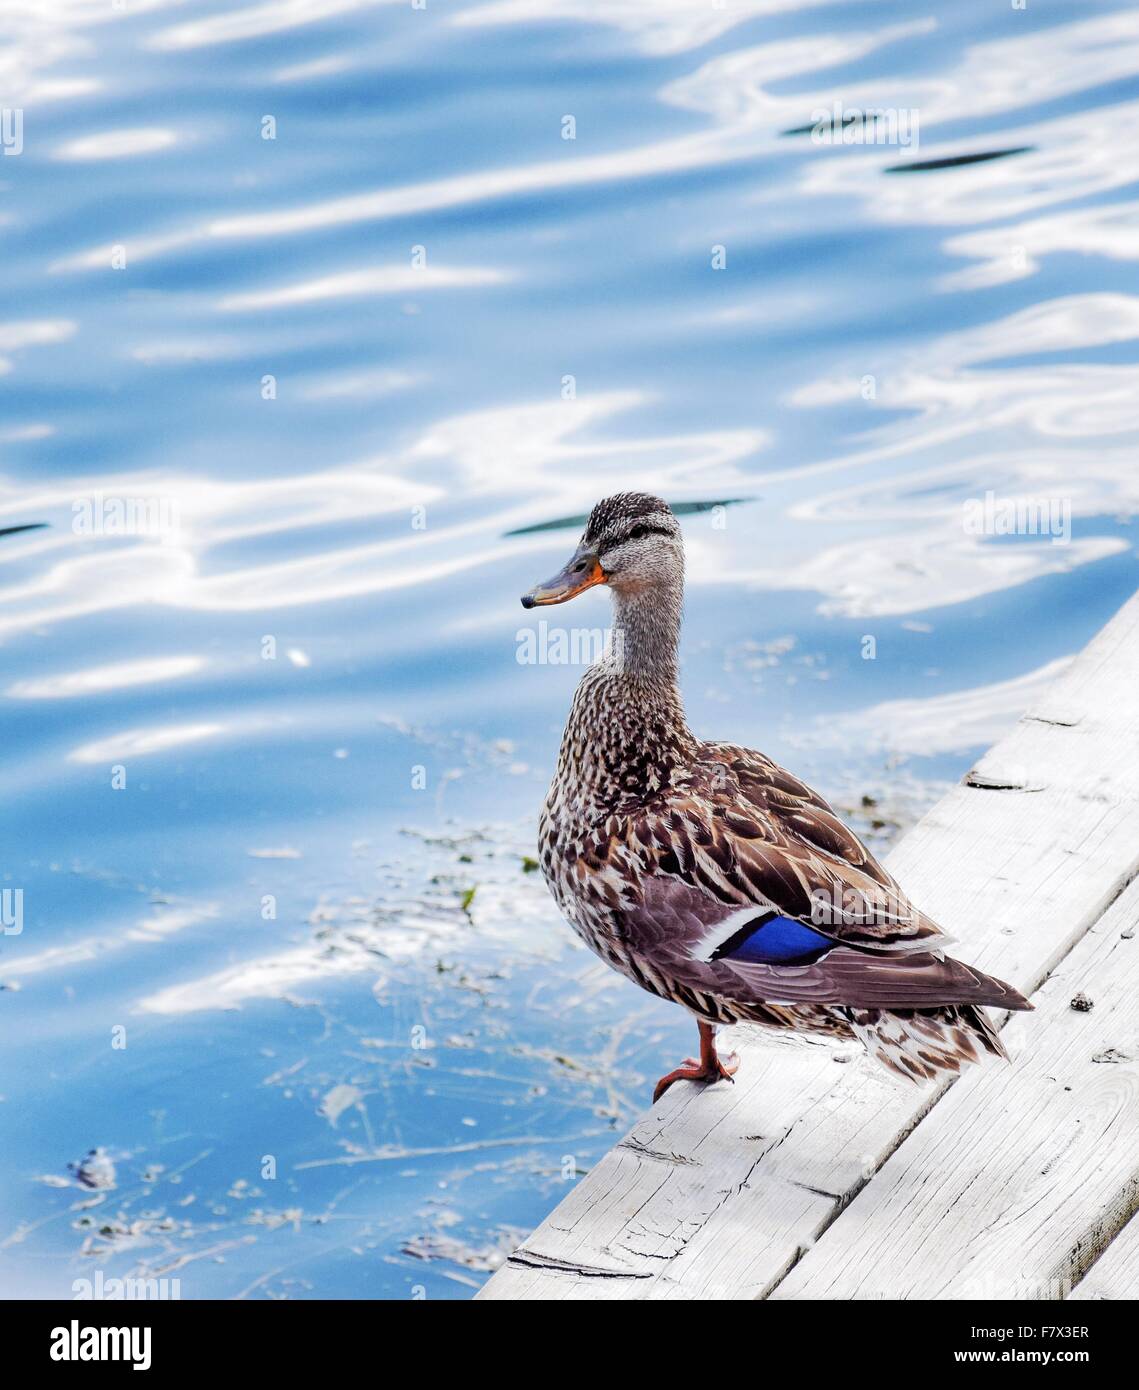 Duck standing on one leg by lake Stock Photo